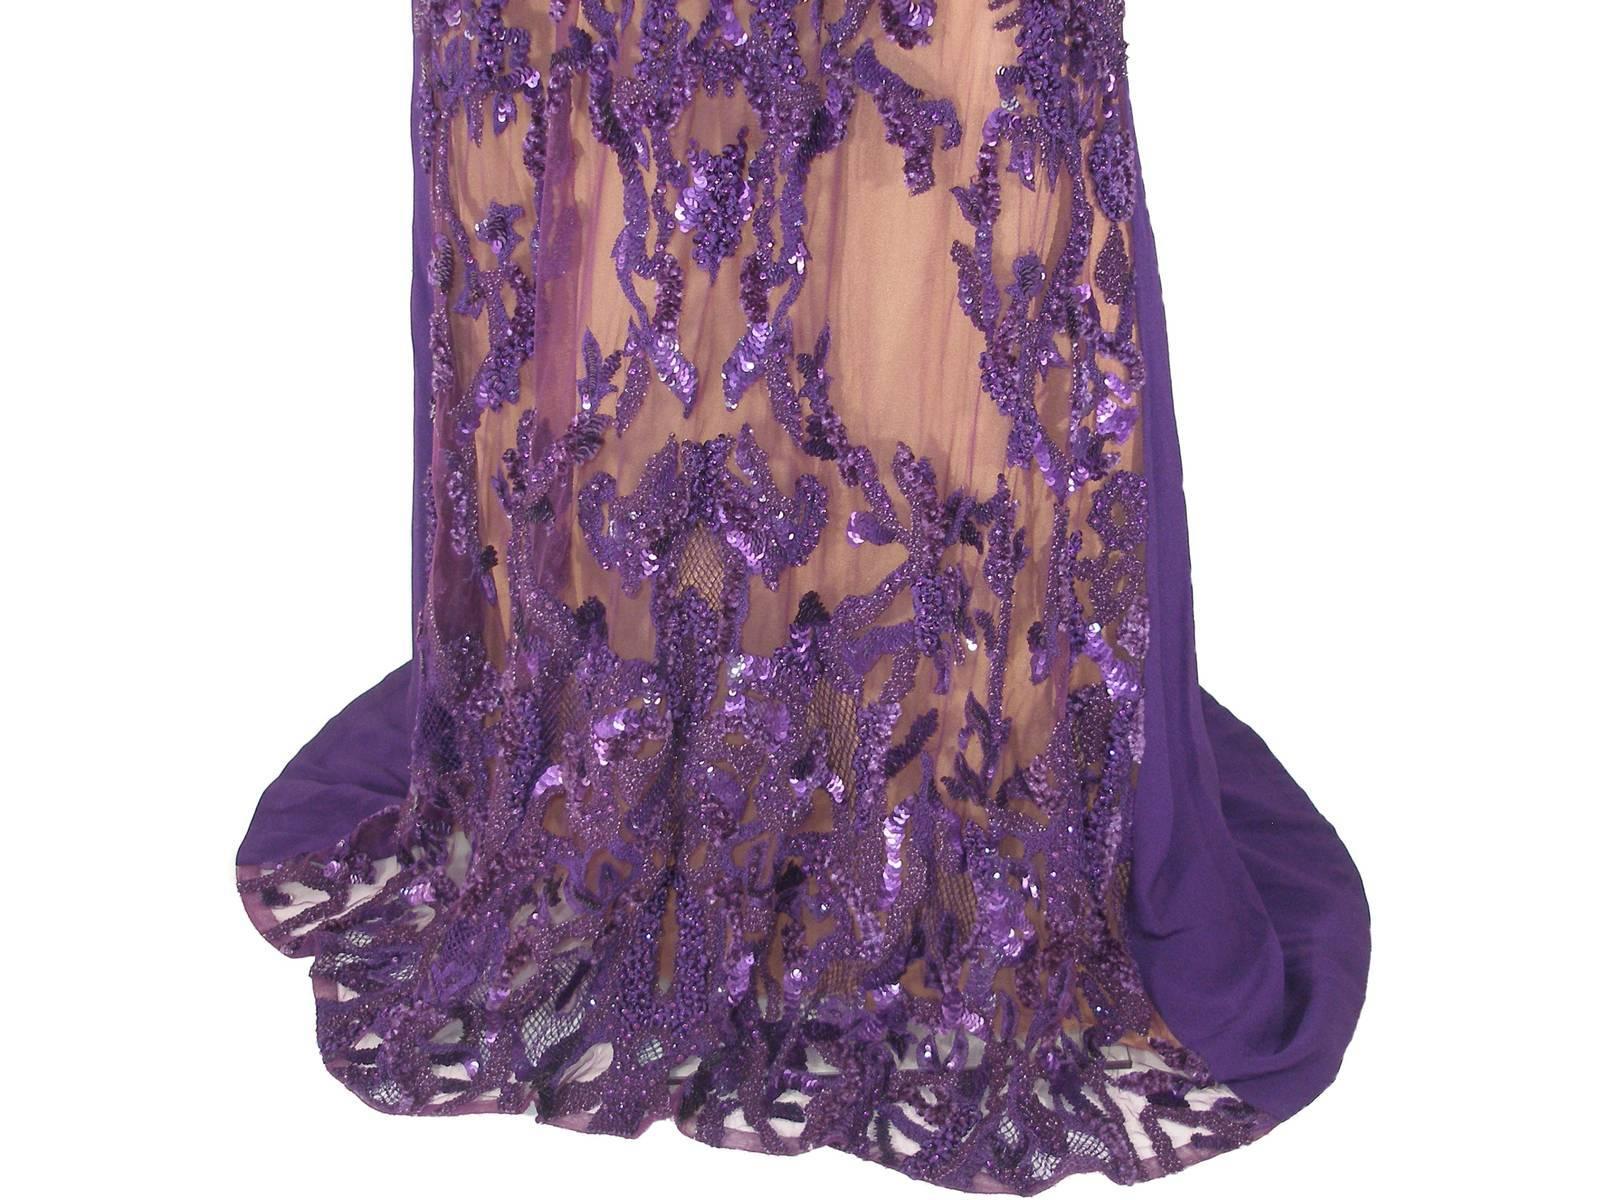 Black Haute Couture Elie Saab Fall 2013 Runway Sequins Gown Purple Size 40 FR